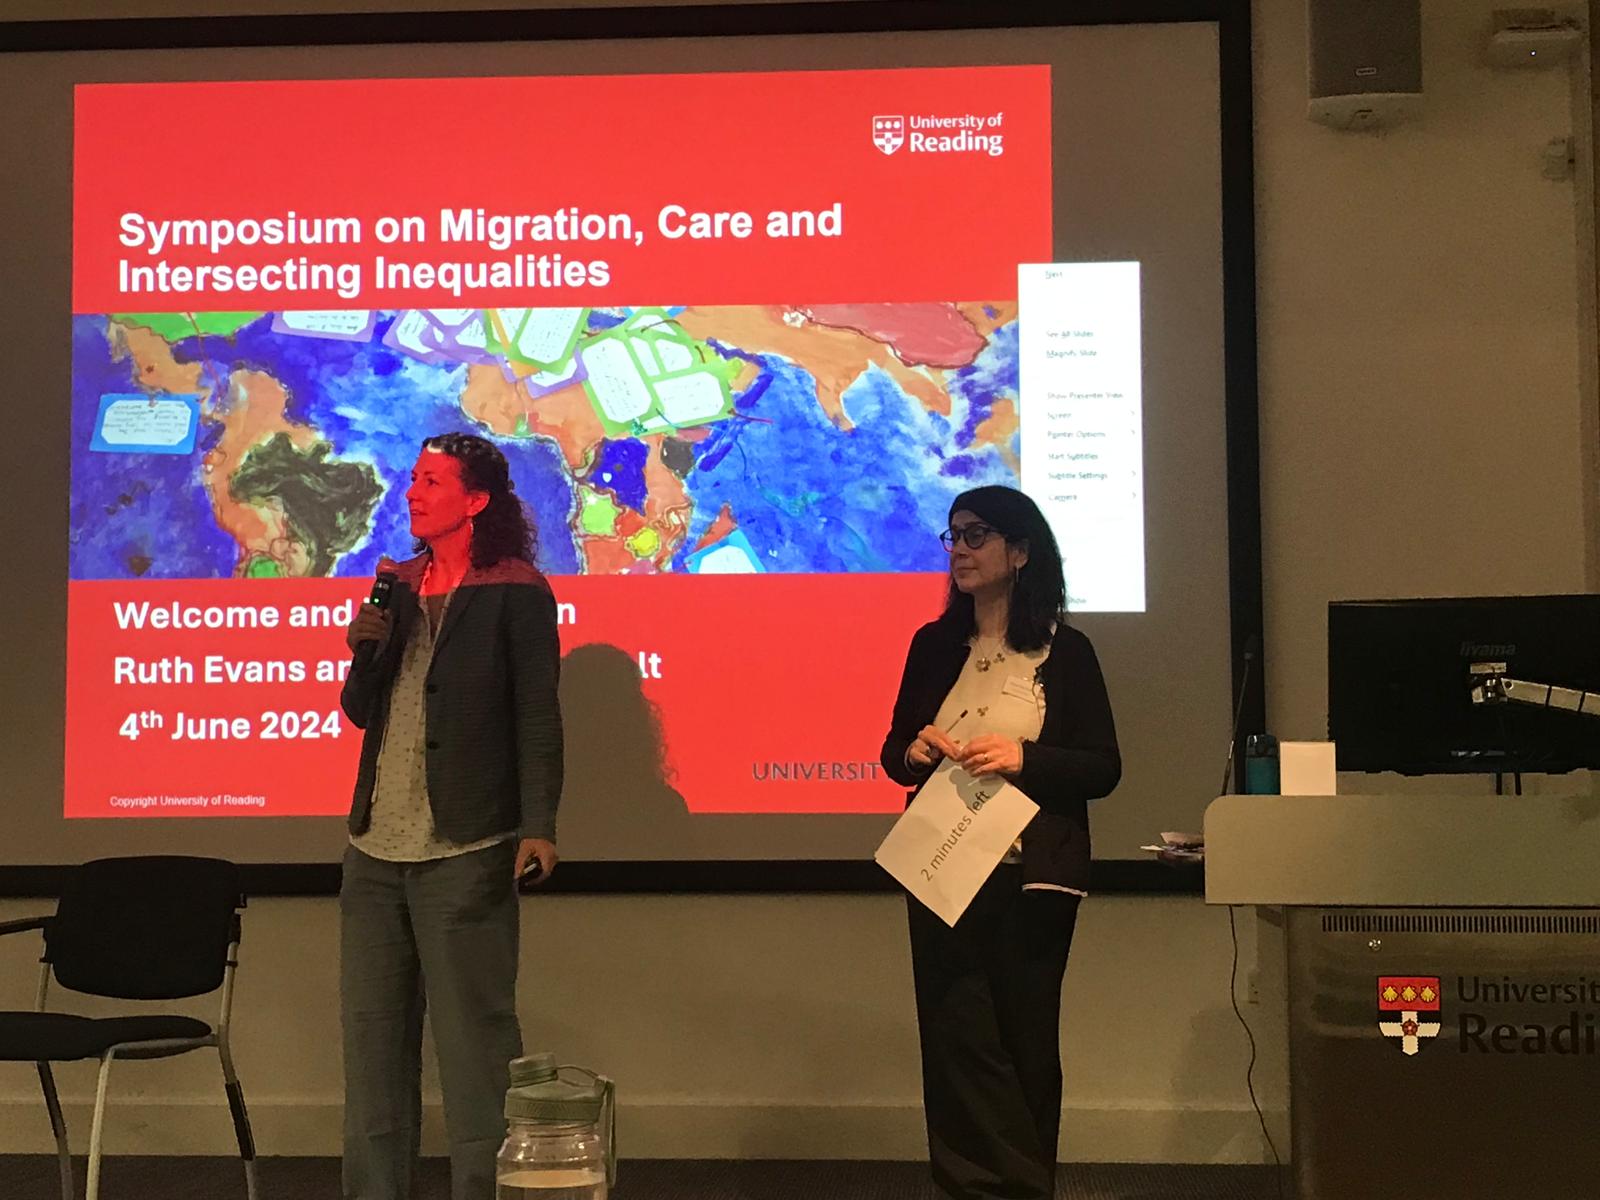 Symposium on Migration, Care and Intersecting Inequalities